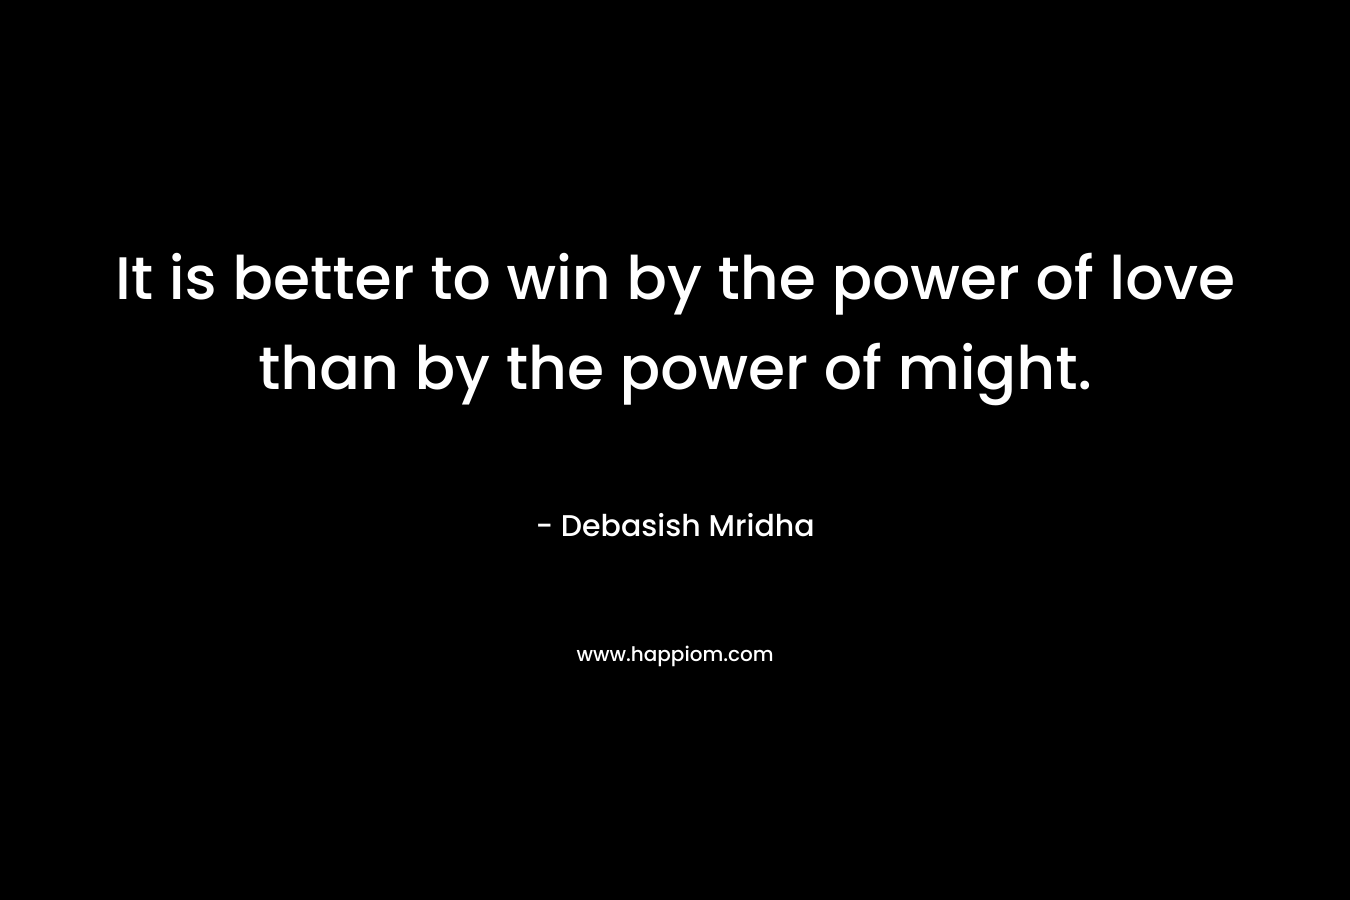 It is better to win by the power of love than by the power of might.